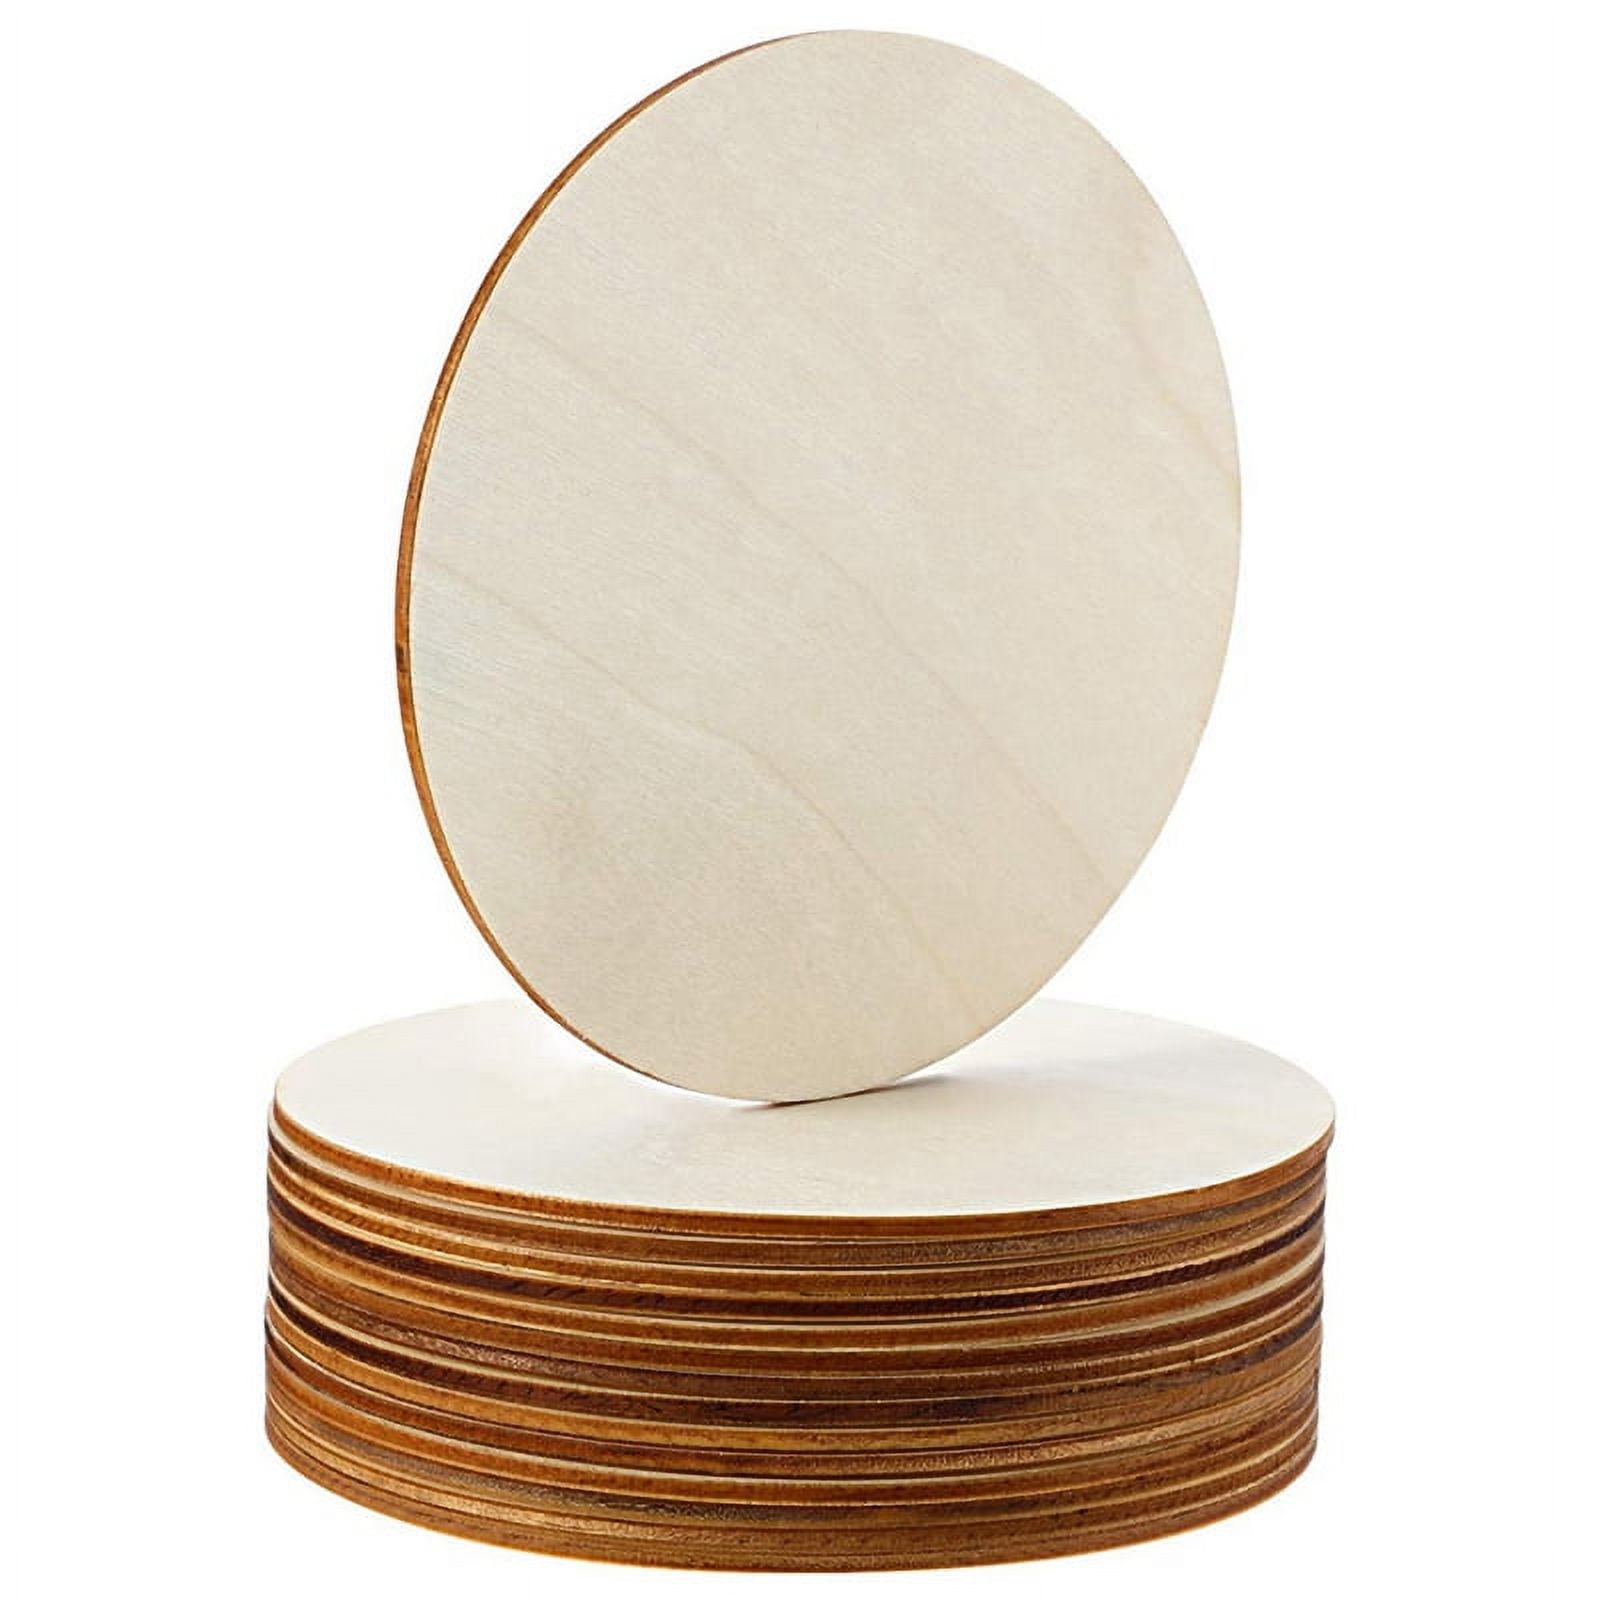 10pcs 50mm Unfinished Flat Wooden Round Rings Blank Circle